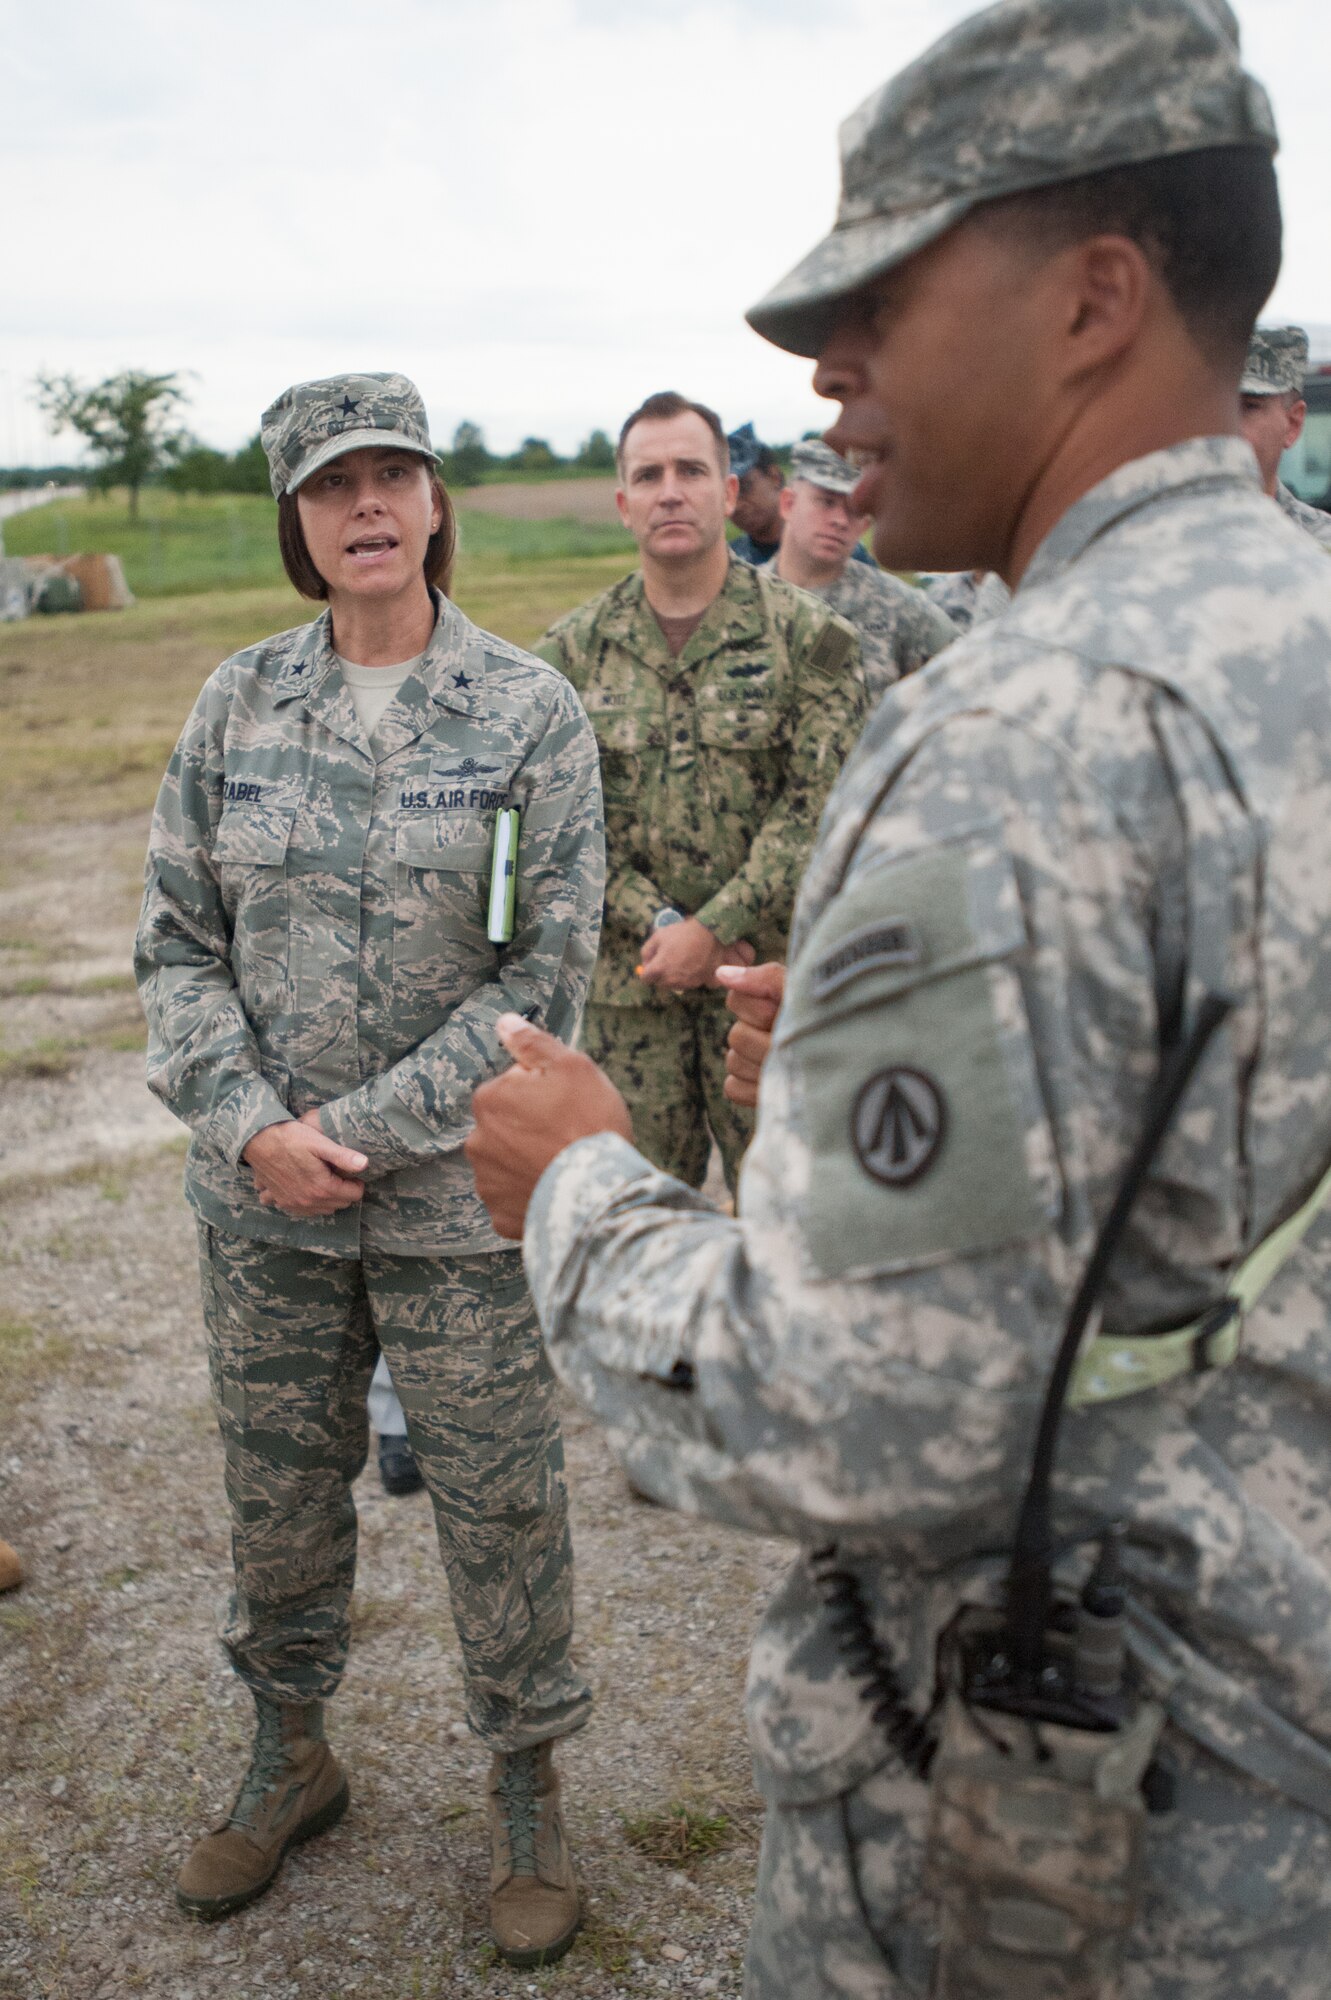 Army Capt. Charles Greene, commander of the U.S. Army’s 689th Rapid Port Opening Element, discusses cargo movement operations with Brig. Gen. Sarah Zabel, director of command, control, communications and Ccyber systems at U.S. Transportation Command, during Exercise Gateway Relief at MidAmerica St. Louis Airport in Mascoutah, Ill., on Aug. 7, 2013.  The exercise is designed to test the ability of the 689th and the Kentucky Air National Guard’s 123rd Contingency Response Group ability to stand up and operate a Joint Task Force-Port Opening, which receives relief supplies by airlift and stages them for movement over land. (U.S. Air National Guard photo by Maj. Dale Greer)